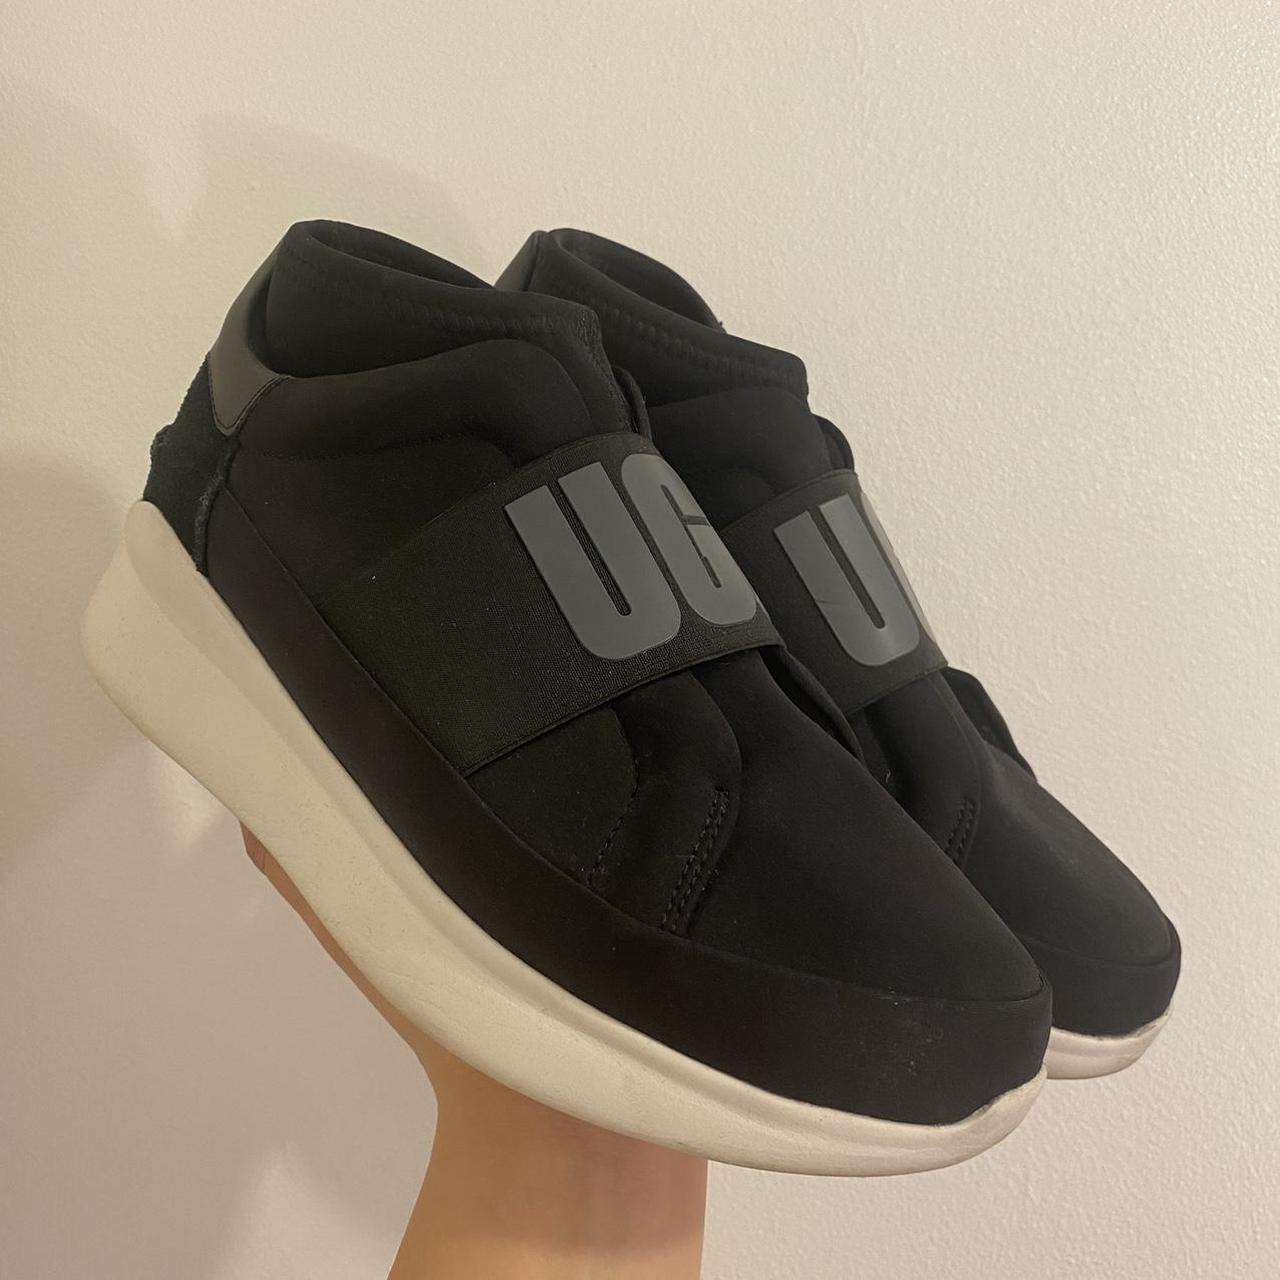 Product Image 2 - Black Ugg Slip-on Trainers 🖤
Very